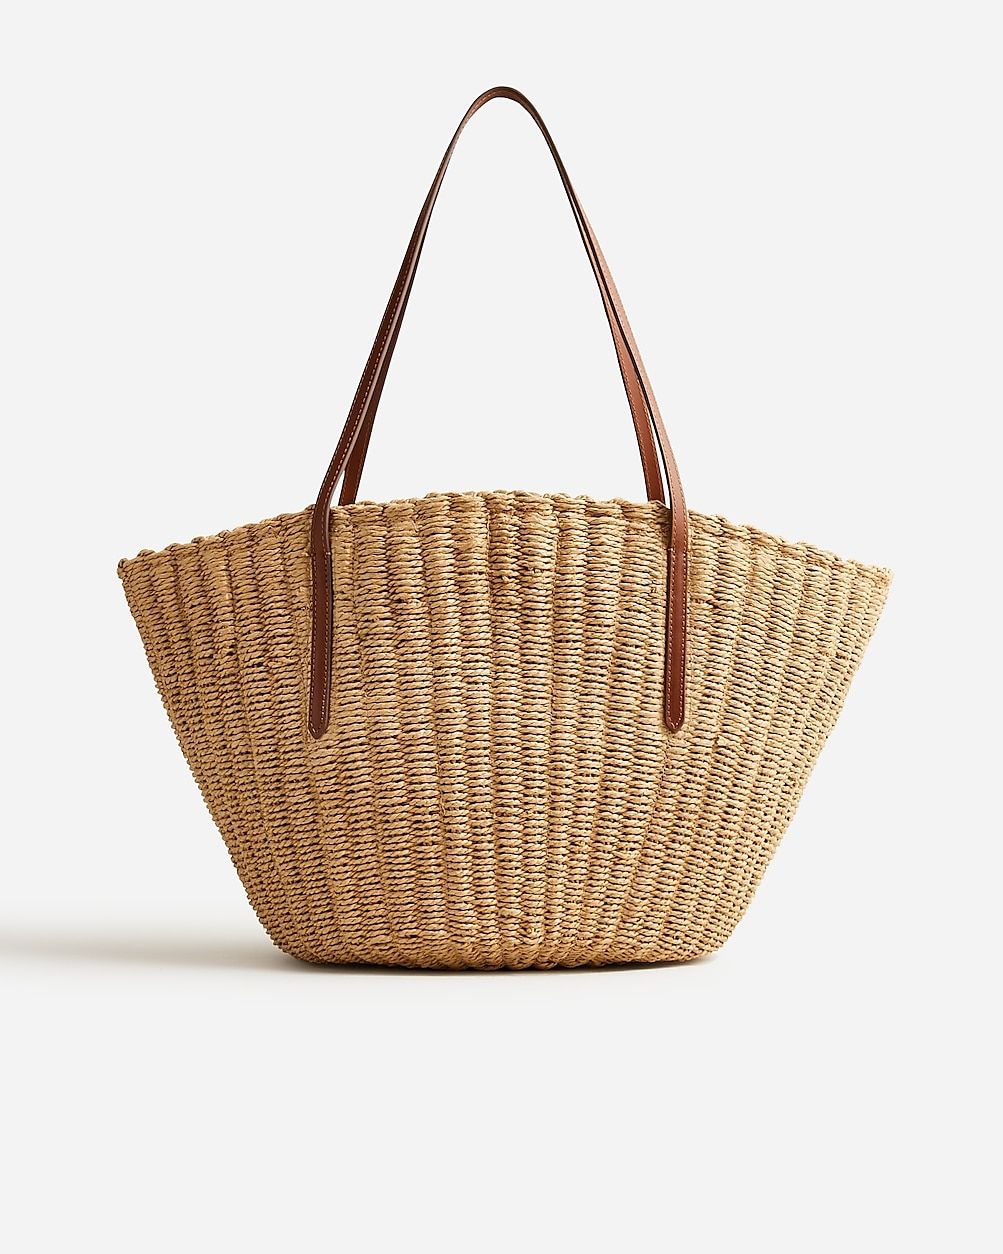 best sellerComo woven straw tote$118.00Select Colors$89.50Natural Straw$89.50One SizeSize & Fit I... | J.Crew US